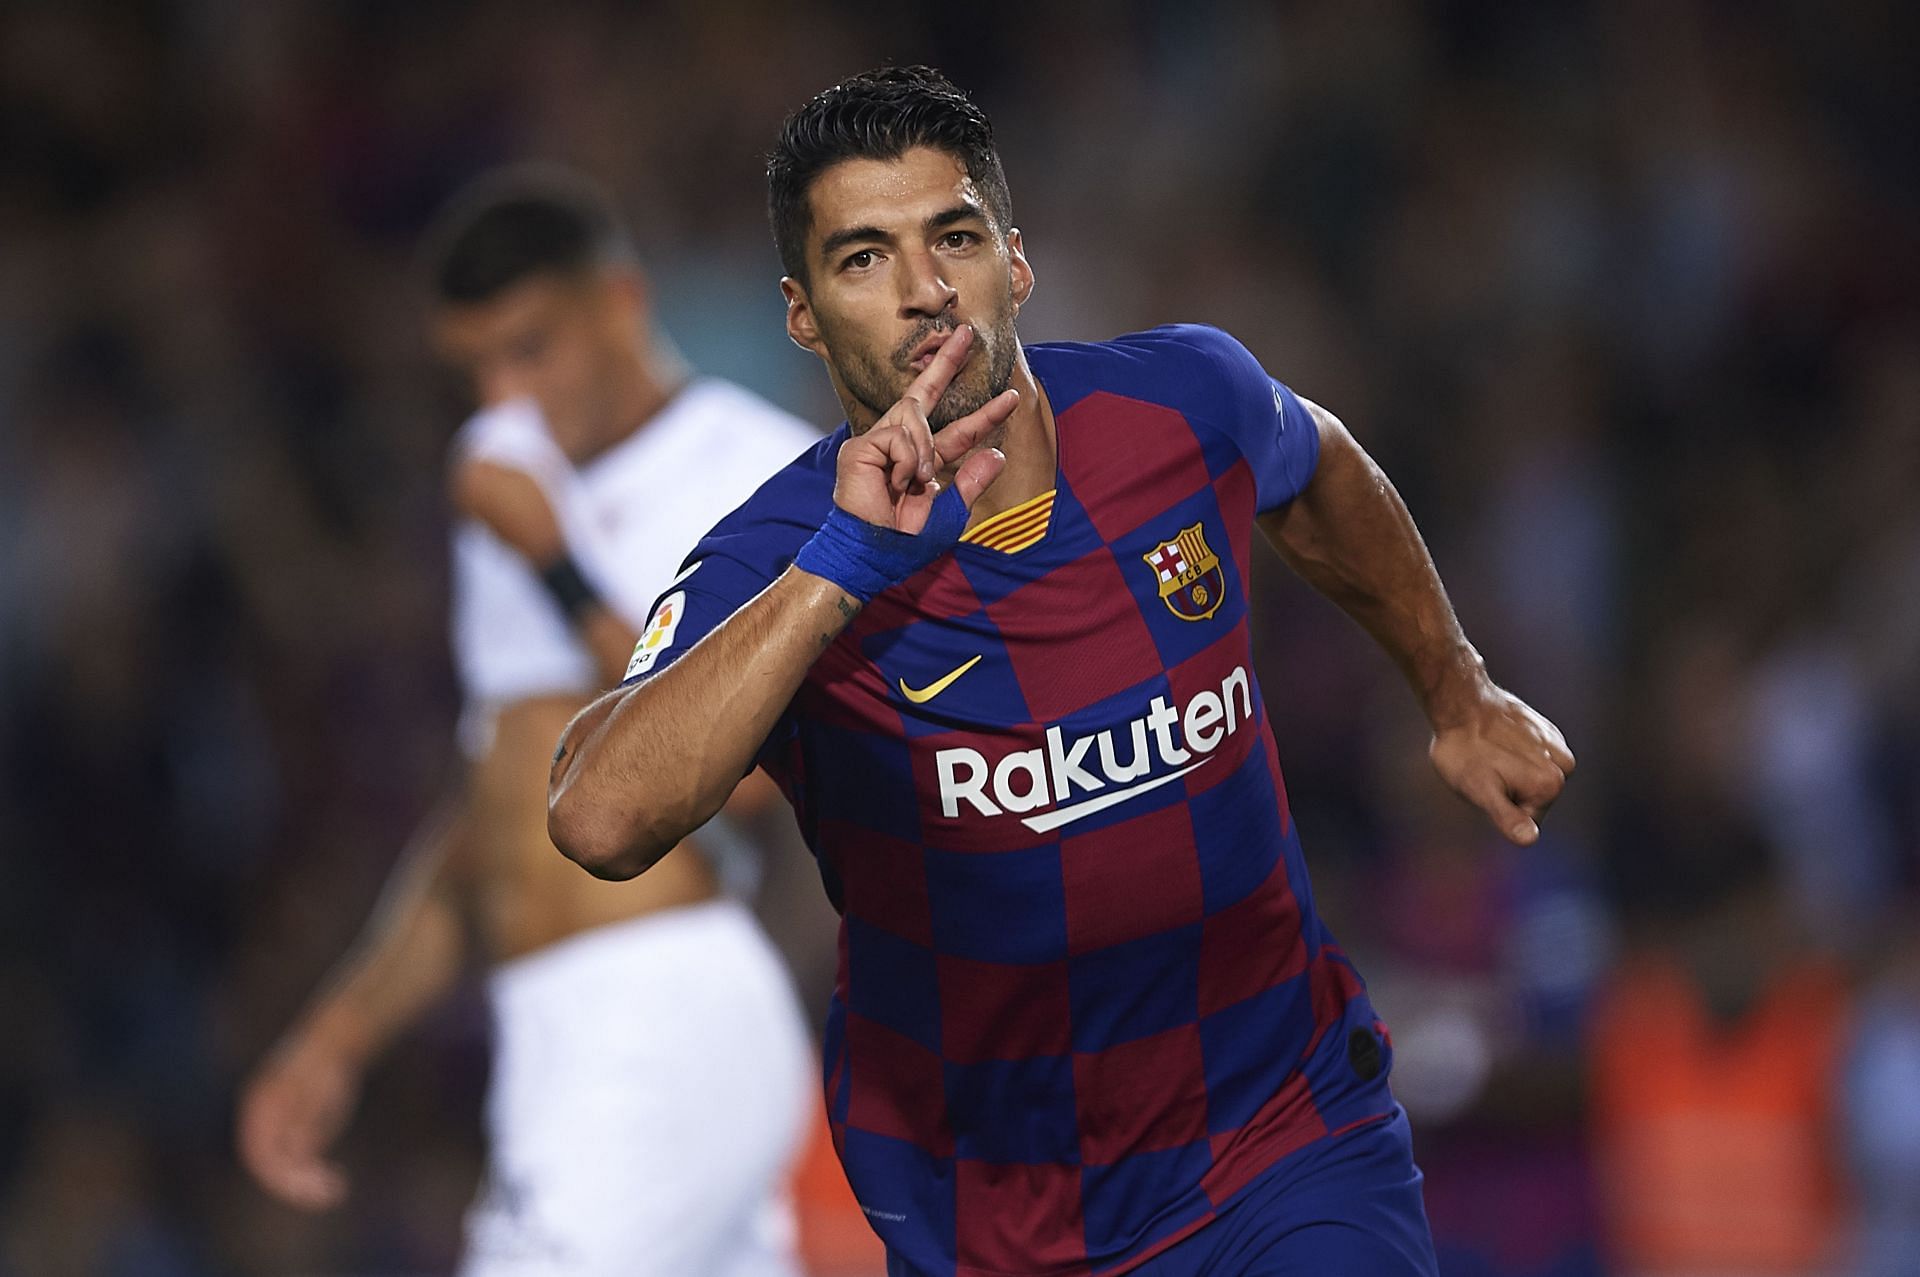 Luis Suarez is among the most talented strikers of his generation